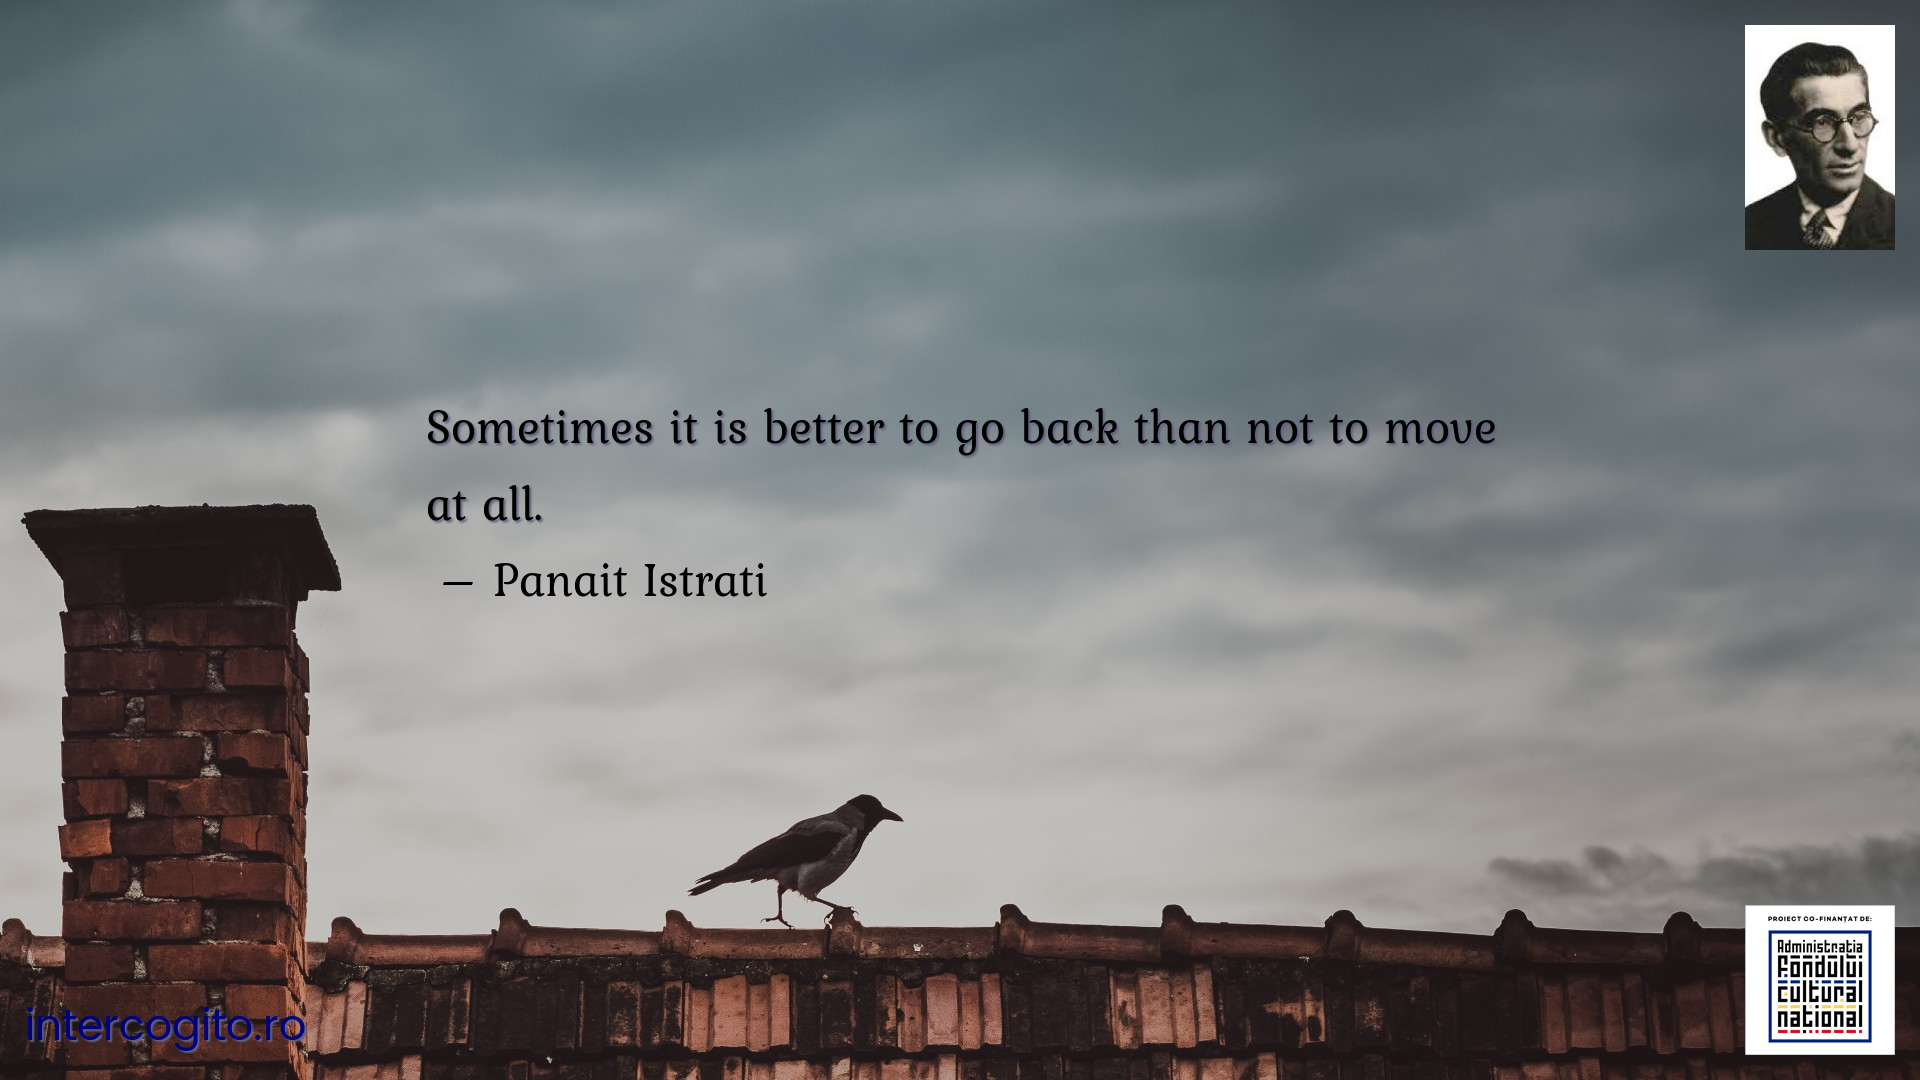 Sometimes it is better to go back than not to move at all.